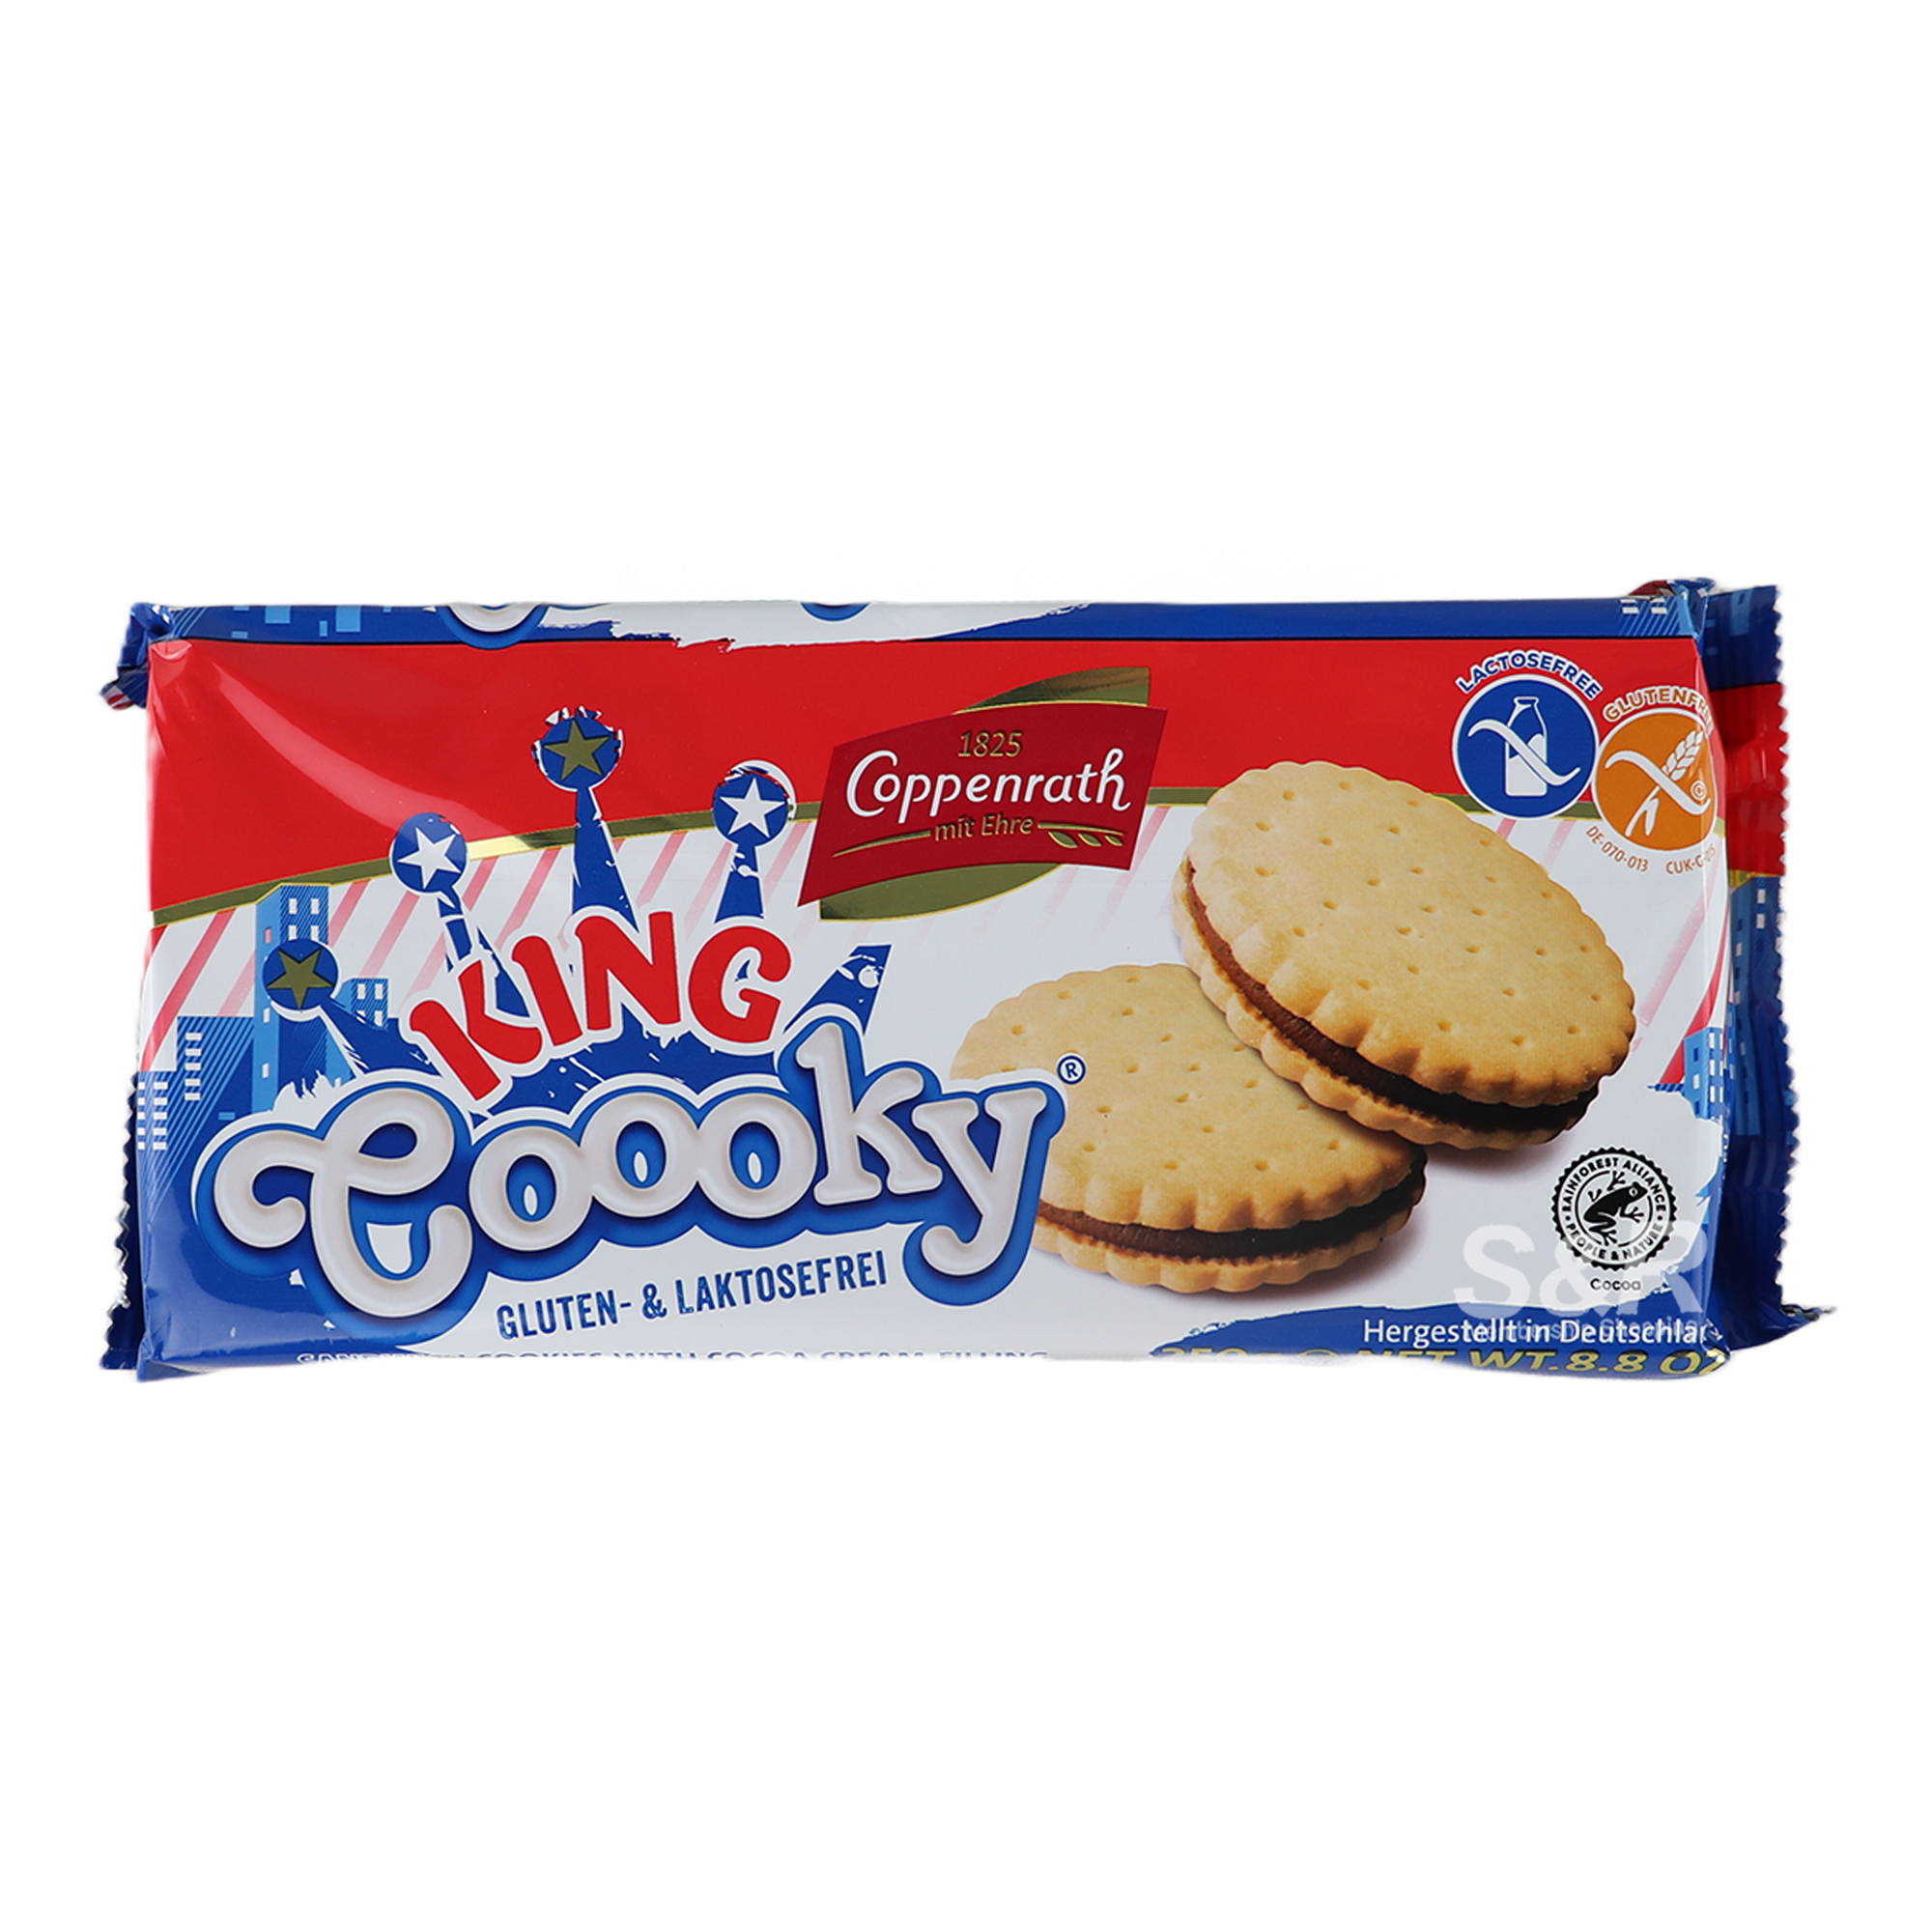 Coppenrath King Coooky 250g